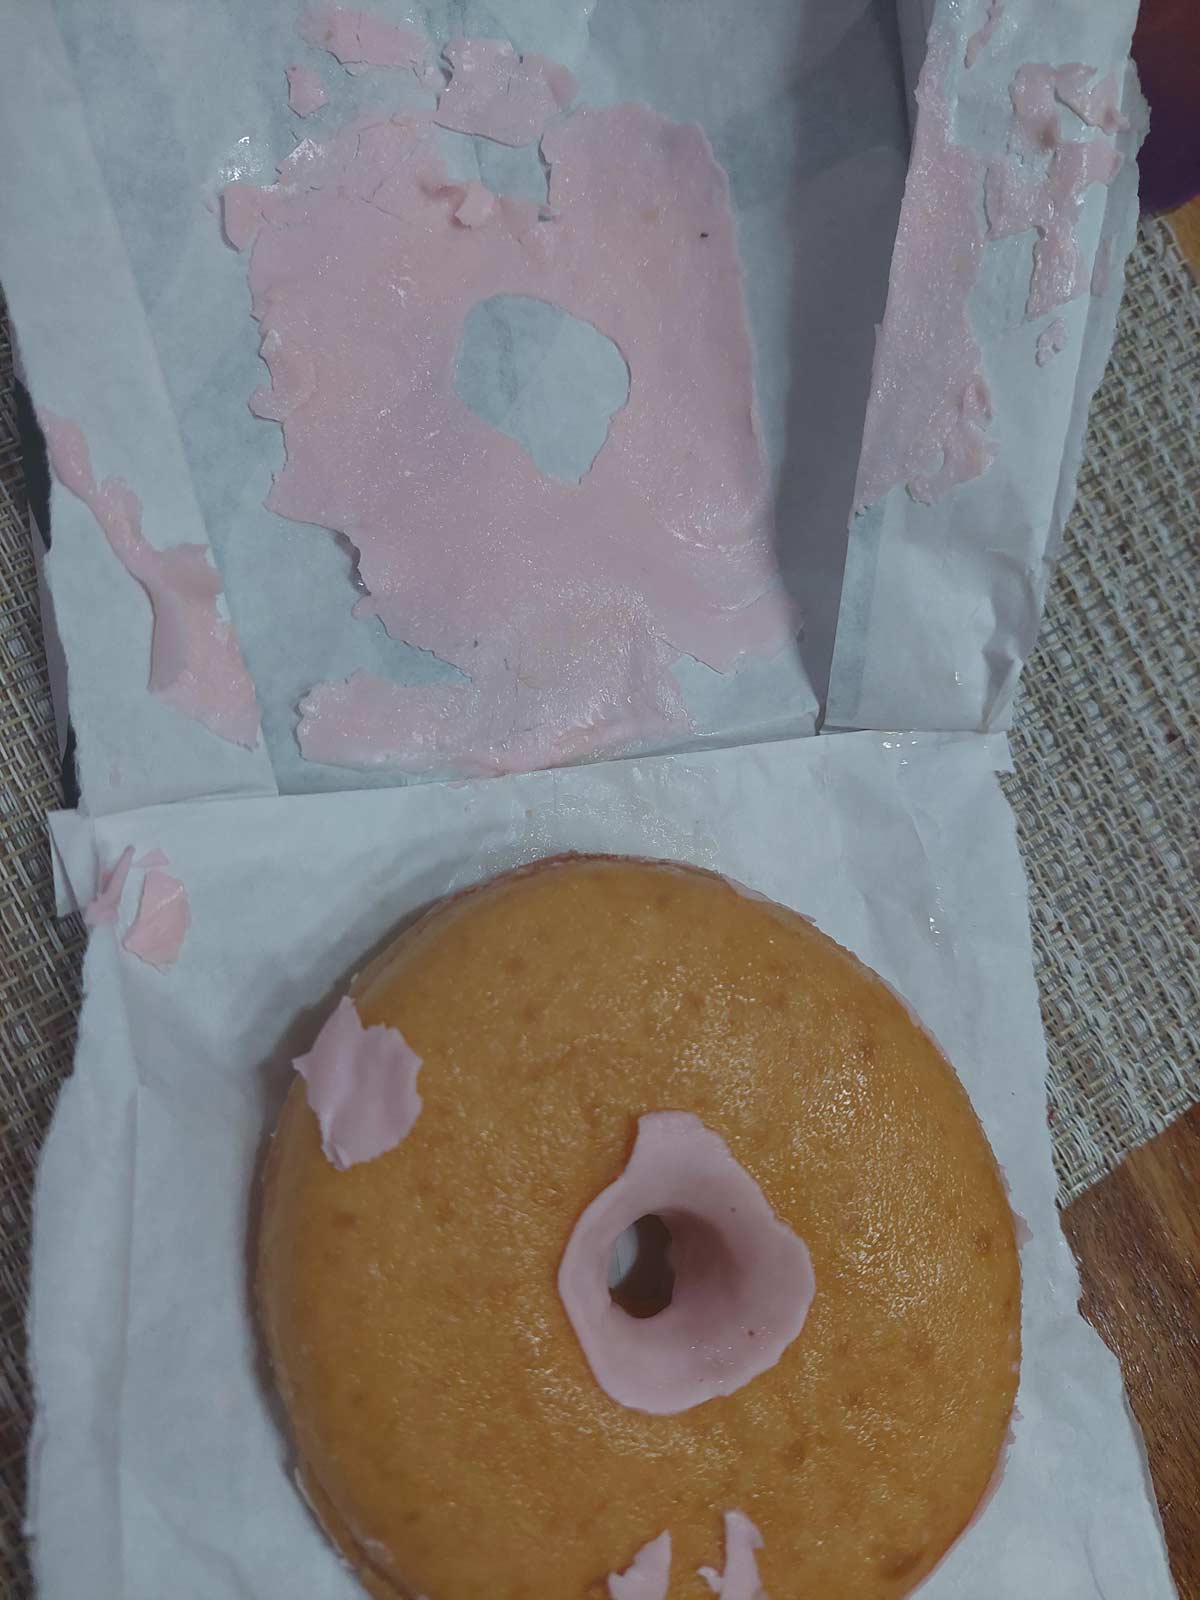 All the frosting on my donut came off